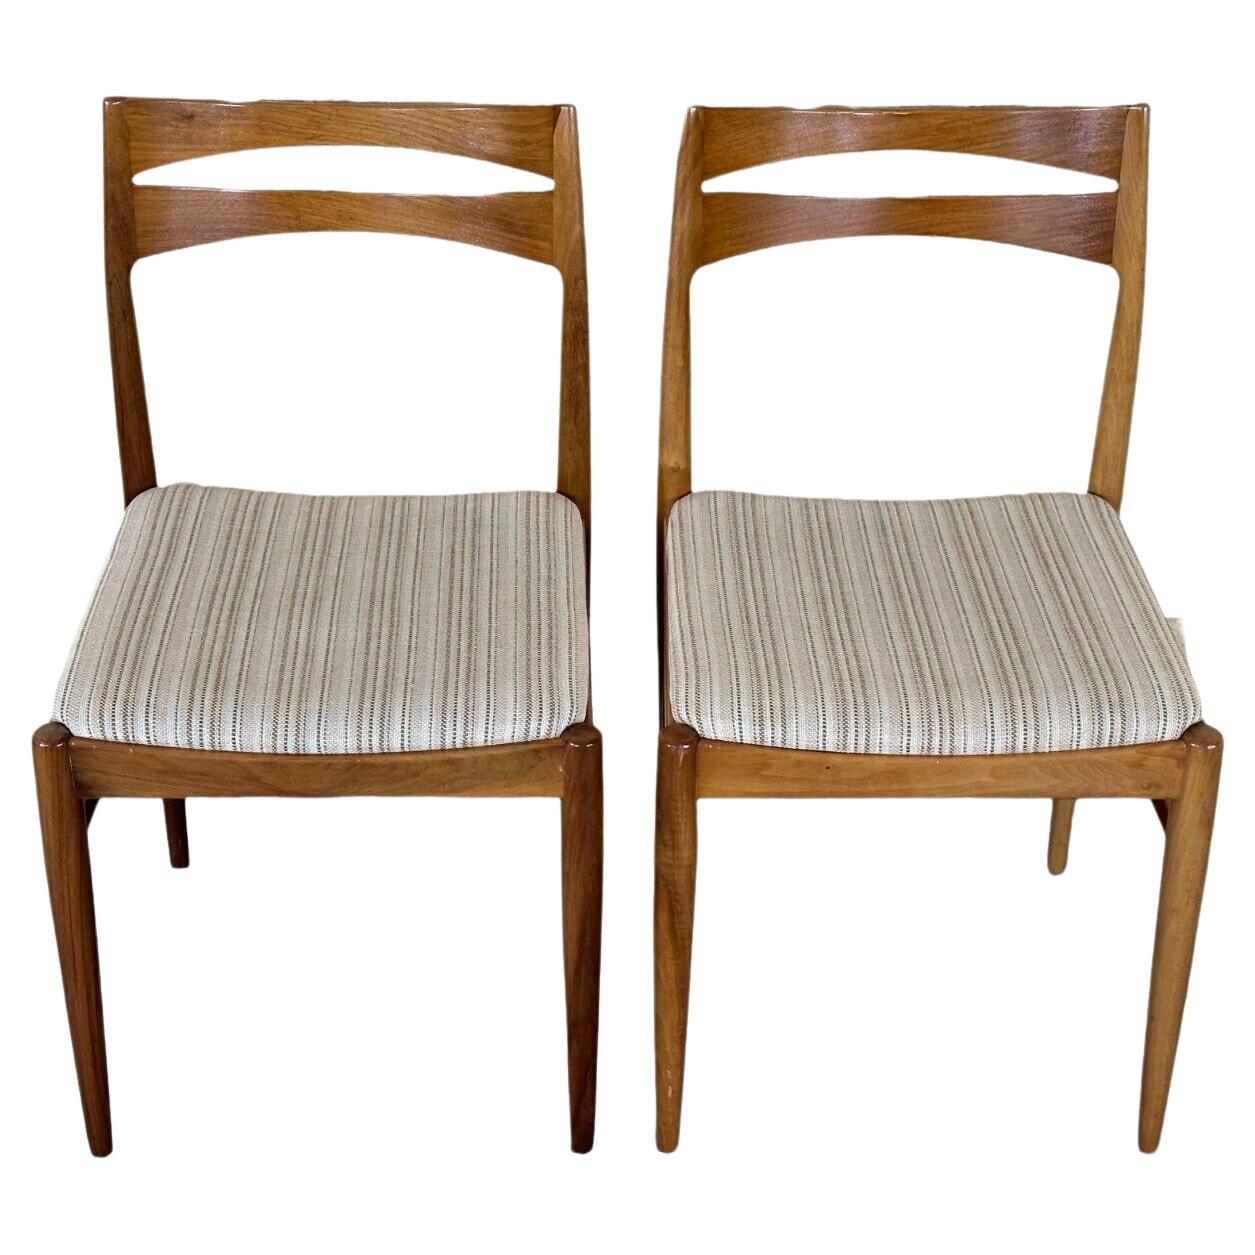 2x 60s 70s dining chair dining chair mid century Danish modern design For Sale